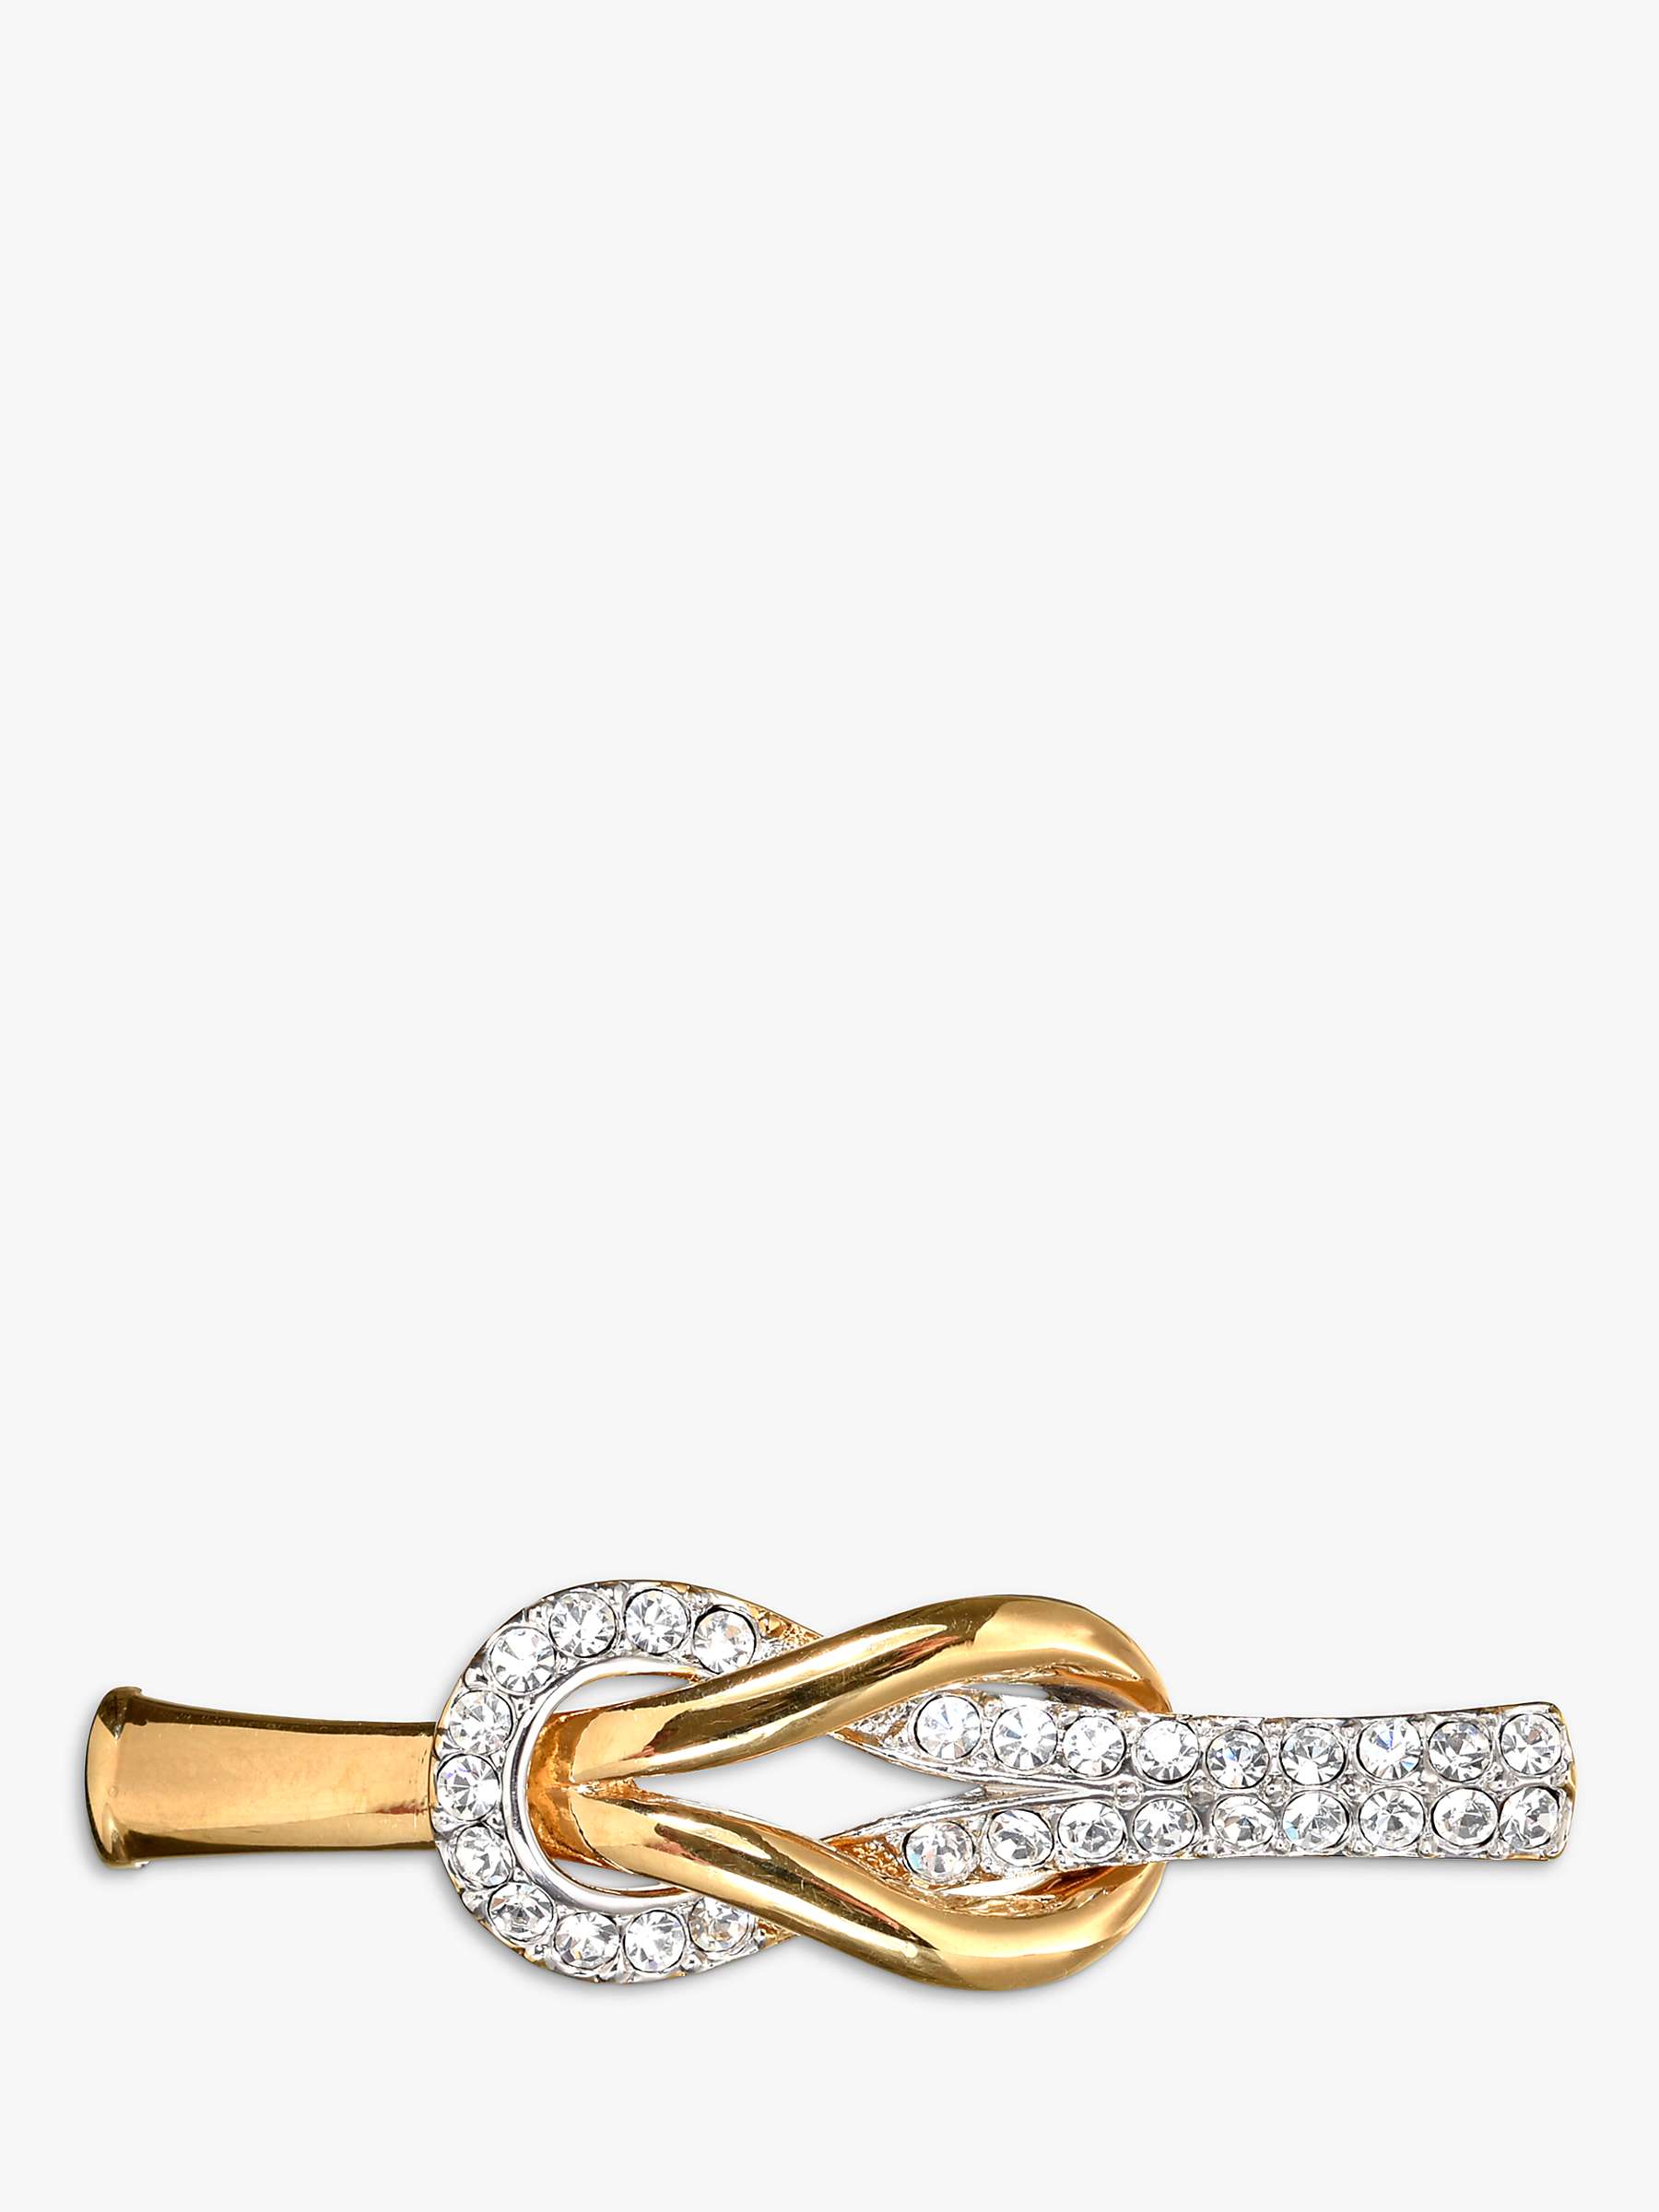 Buy Eclectica Vintage Attwood & Sawyer 22ct Gold Plated Swarovski Crystal Knot Bar Brooch, Dated Circa 1980s Online at johnlewis.com